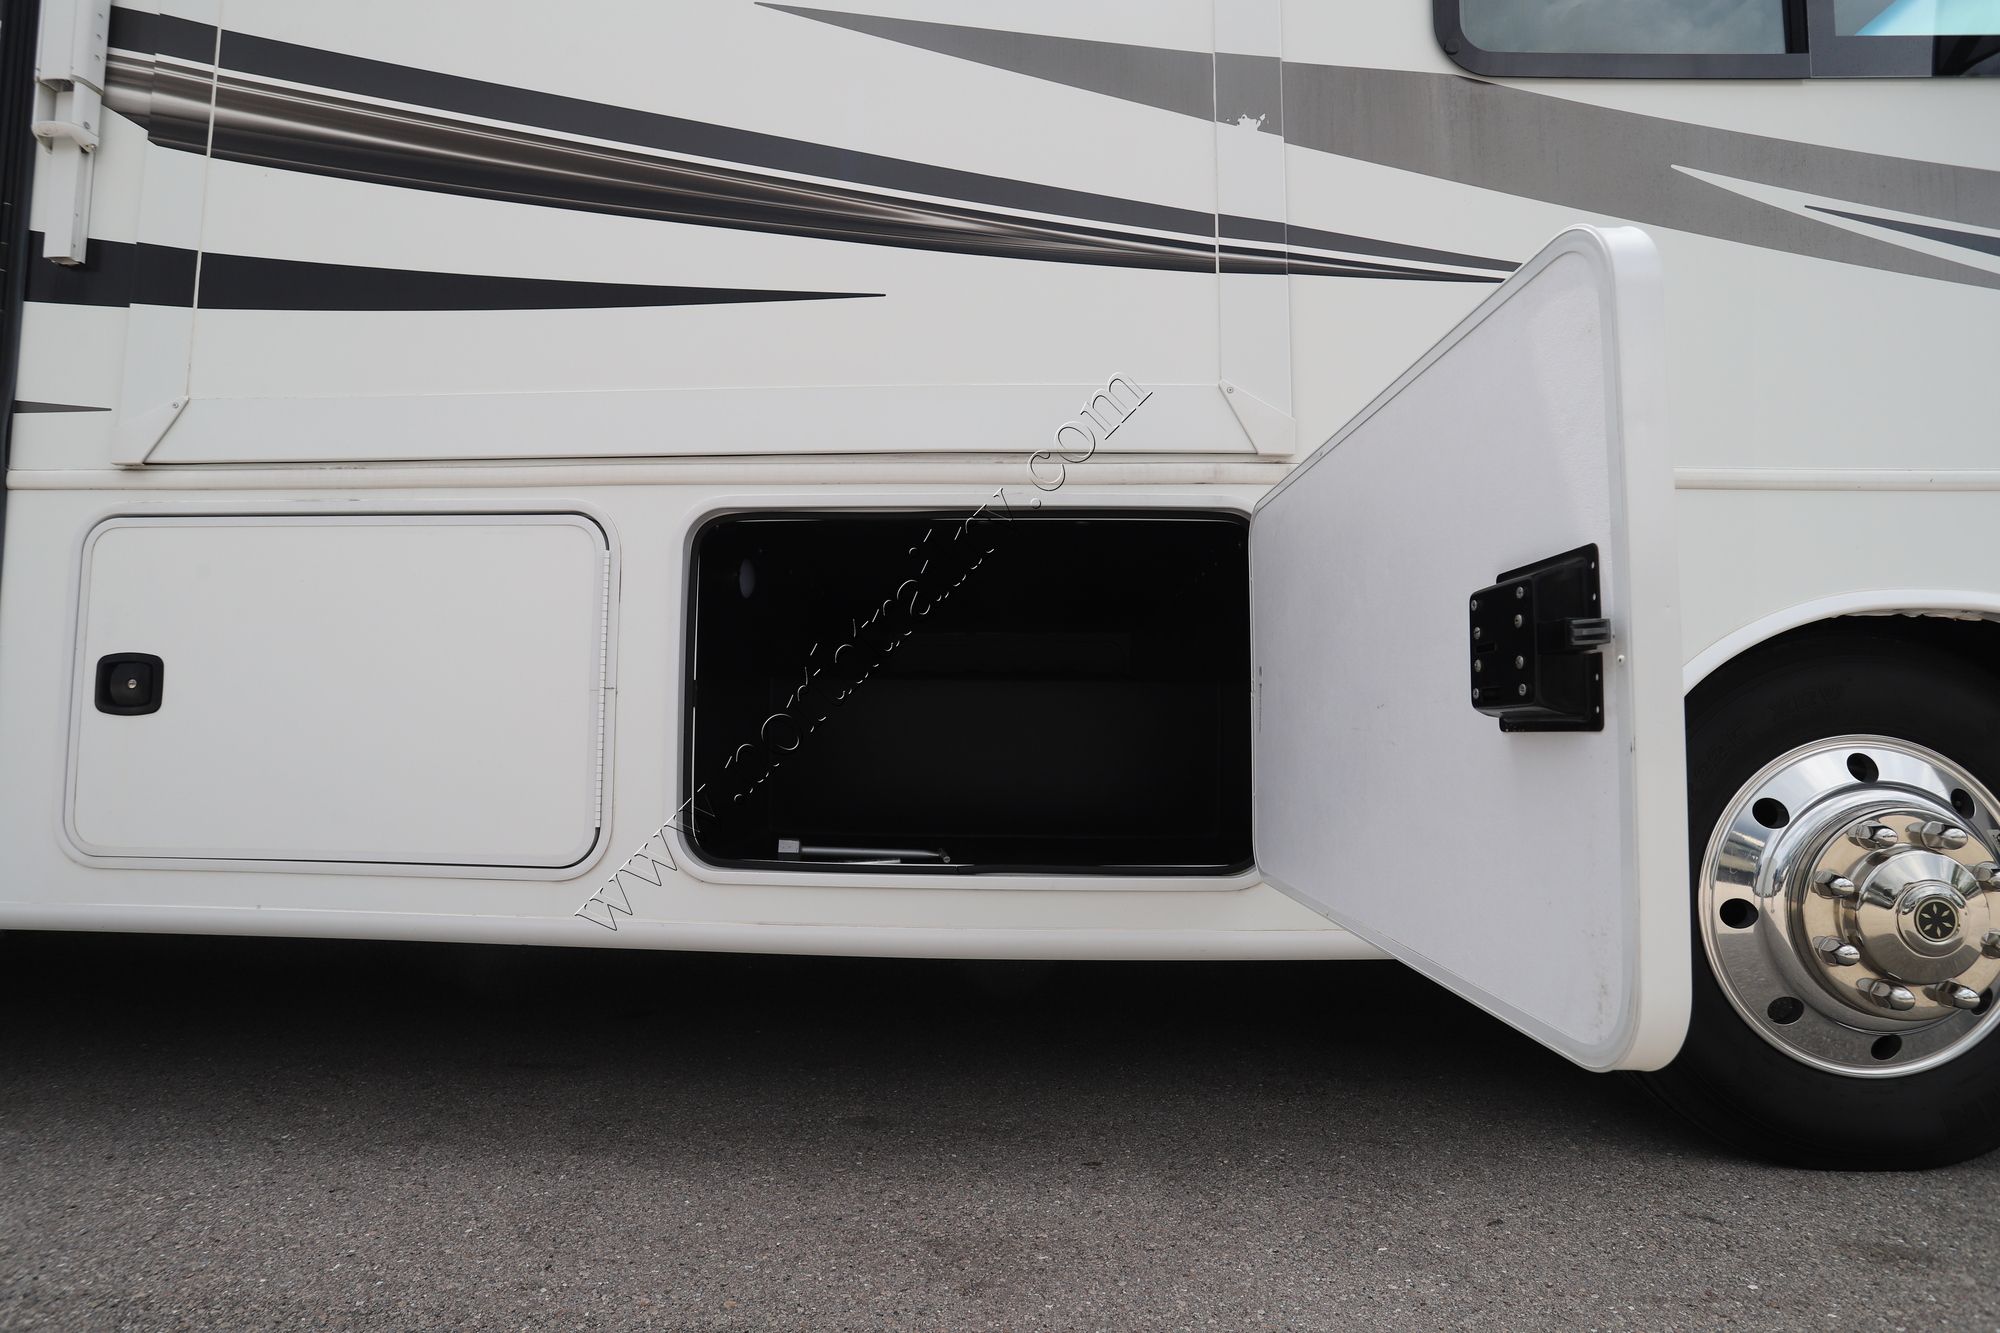 Used 2017 Jayco Precept 36T Class A  For Sale